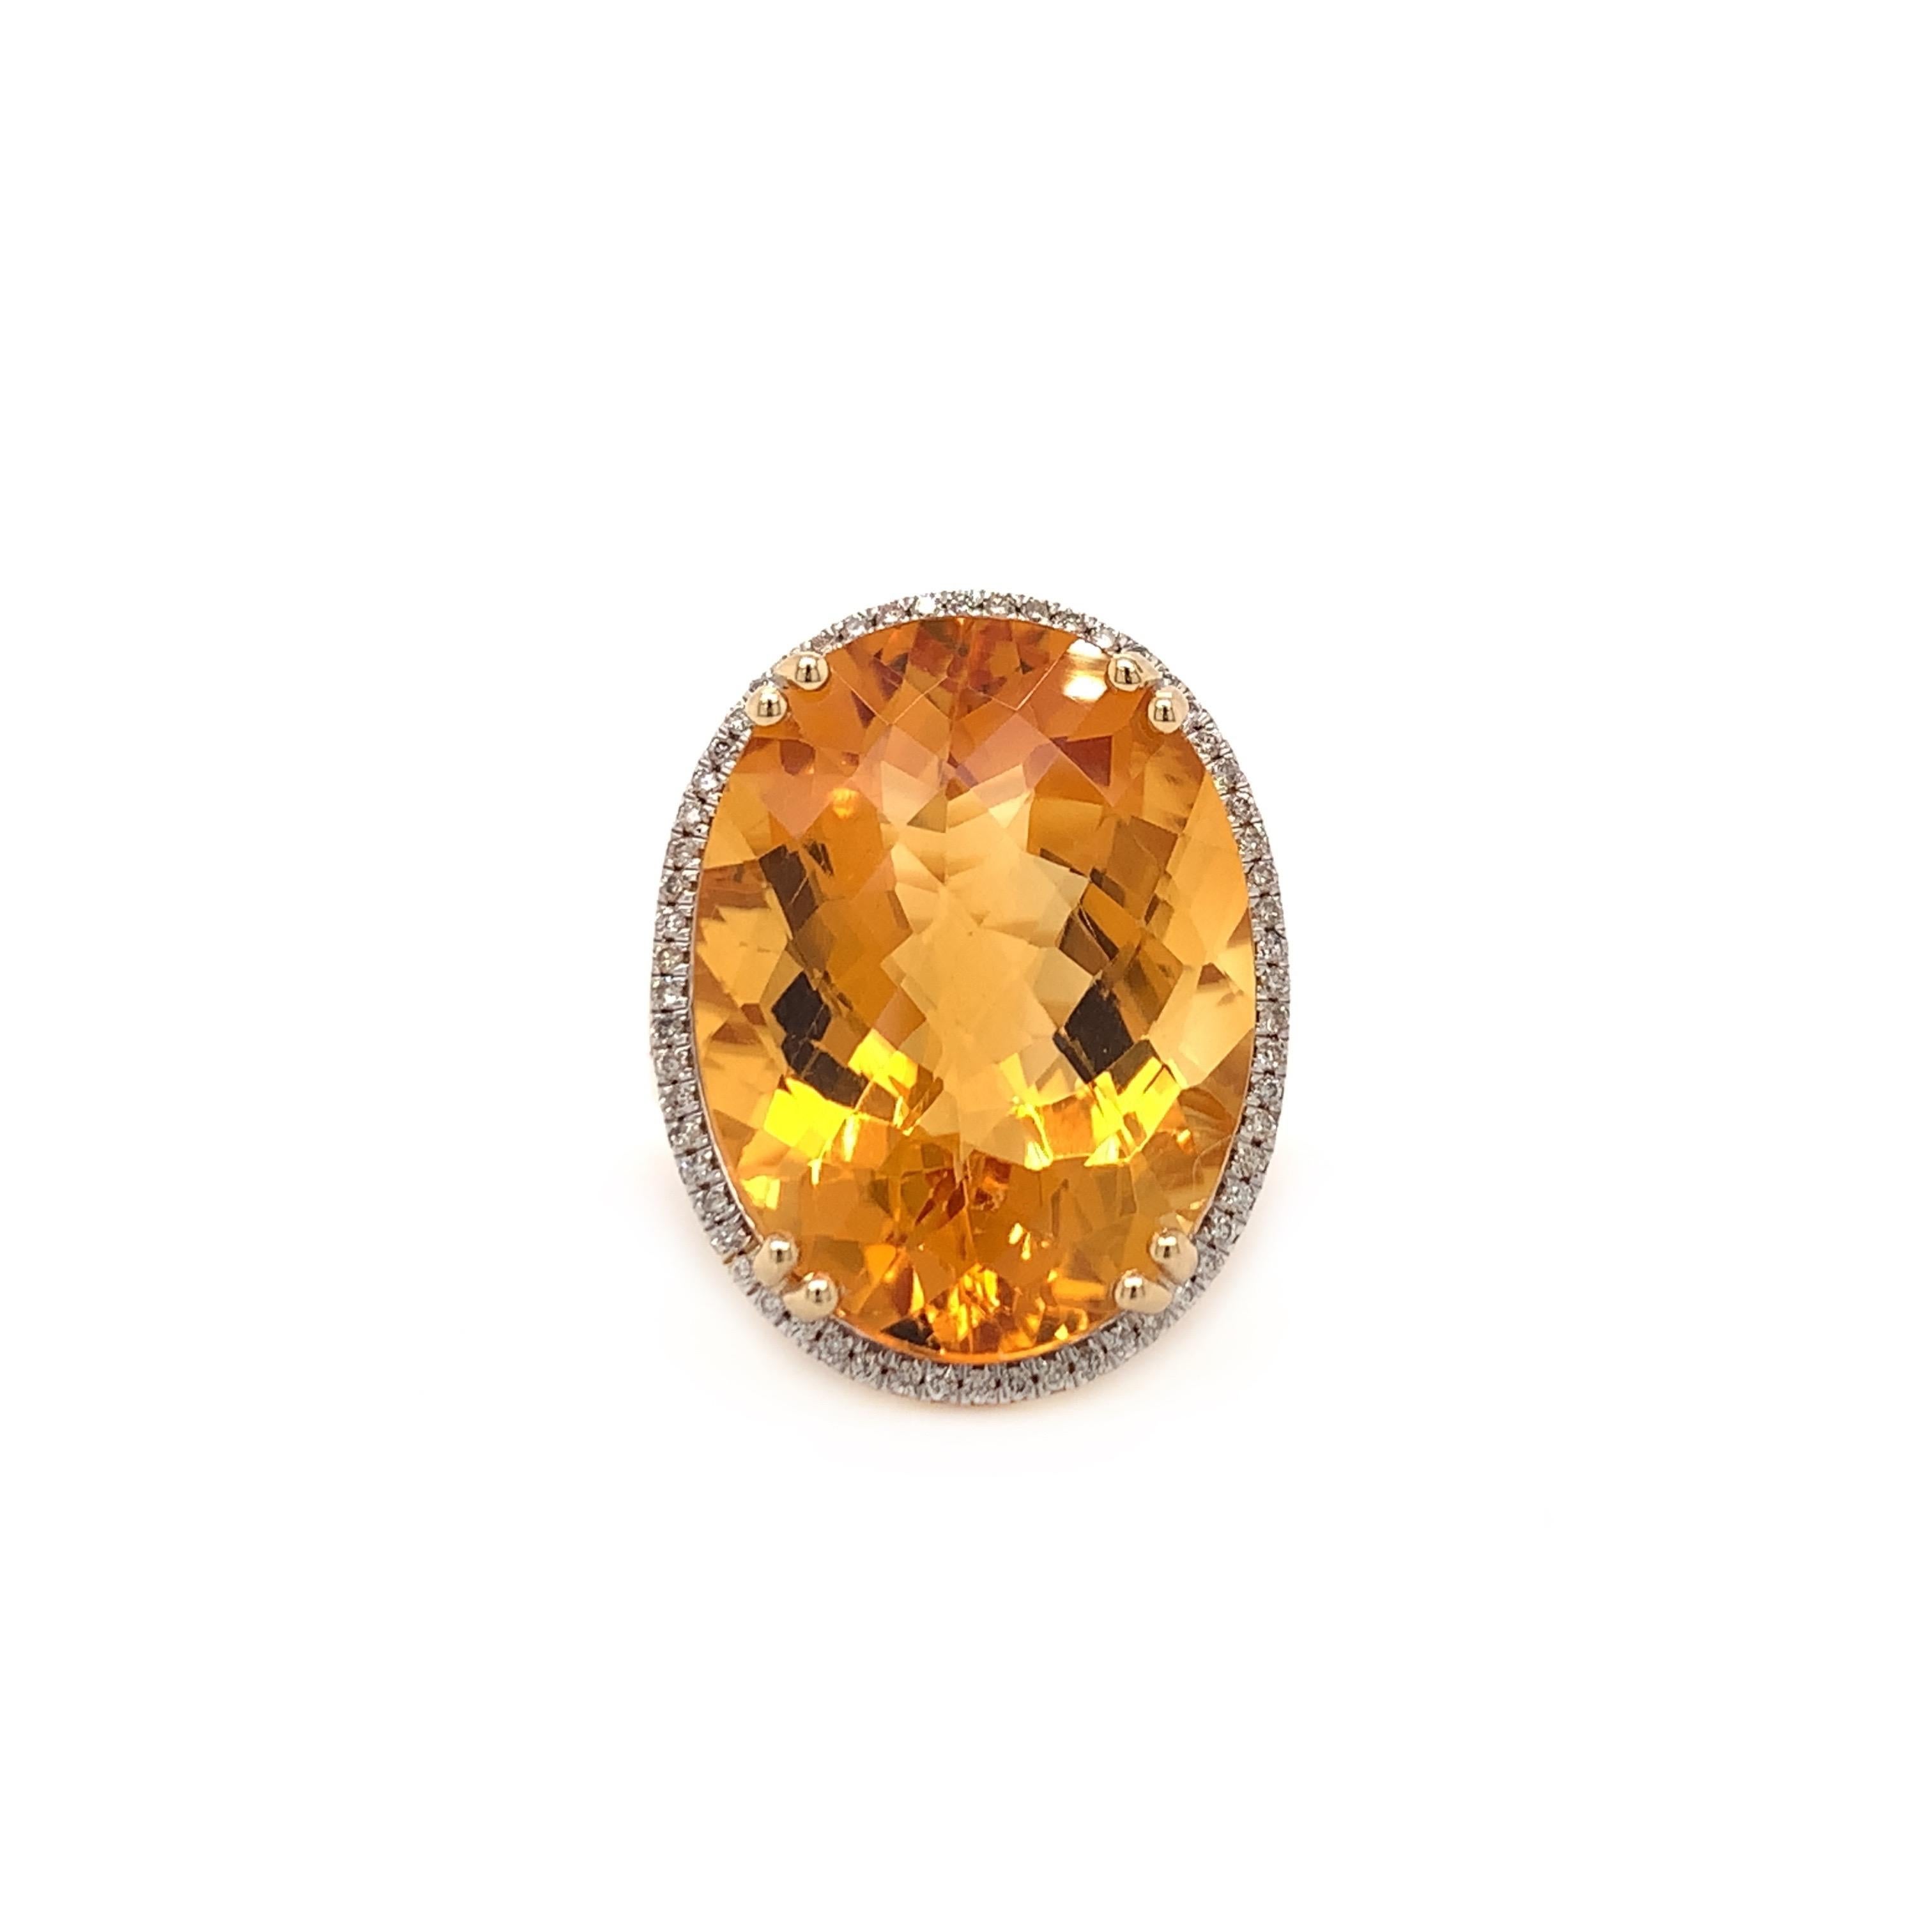 Glamorous large citrine cocktail ring. High brilliance, checkerboard oval faceted, rich golden honey natural 15.45 carat citrine mounted in high profile basket with eight bead prongs, accented with a round brilliant diamond frame. Handcrafted